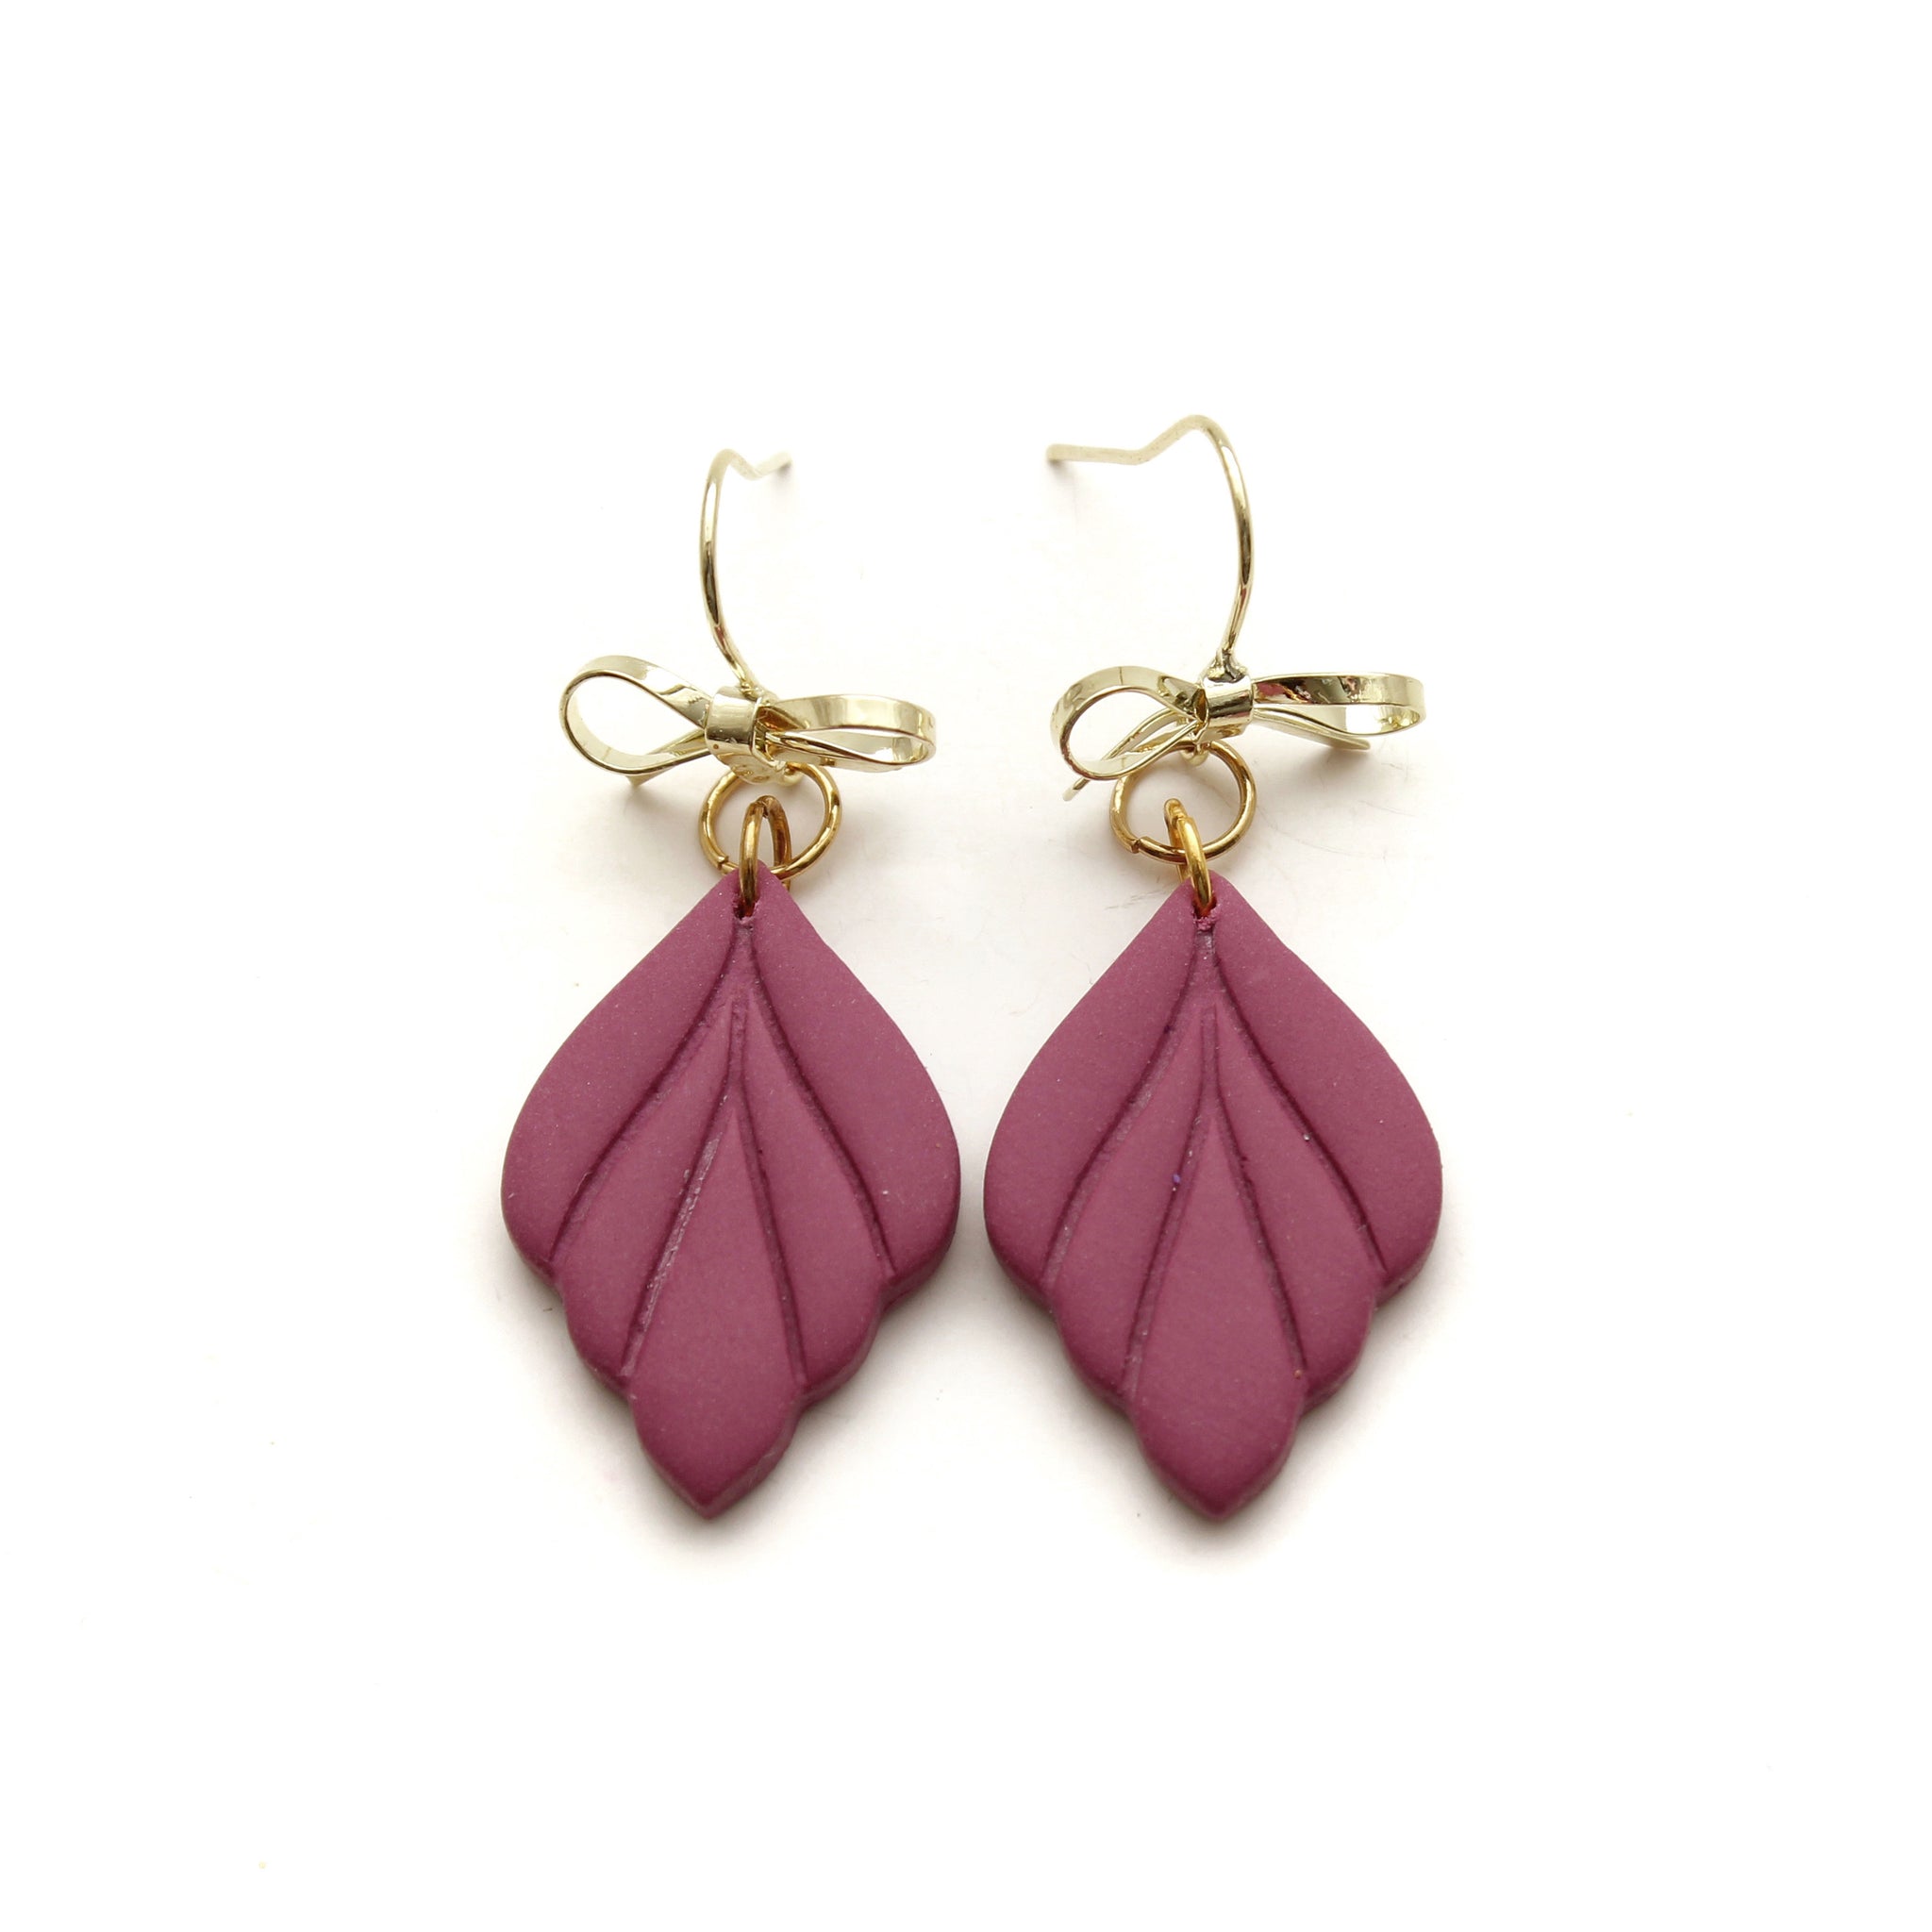 Boysenberry Fawn with Bow Hooks Earrings